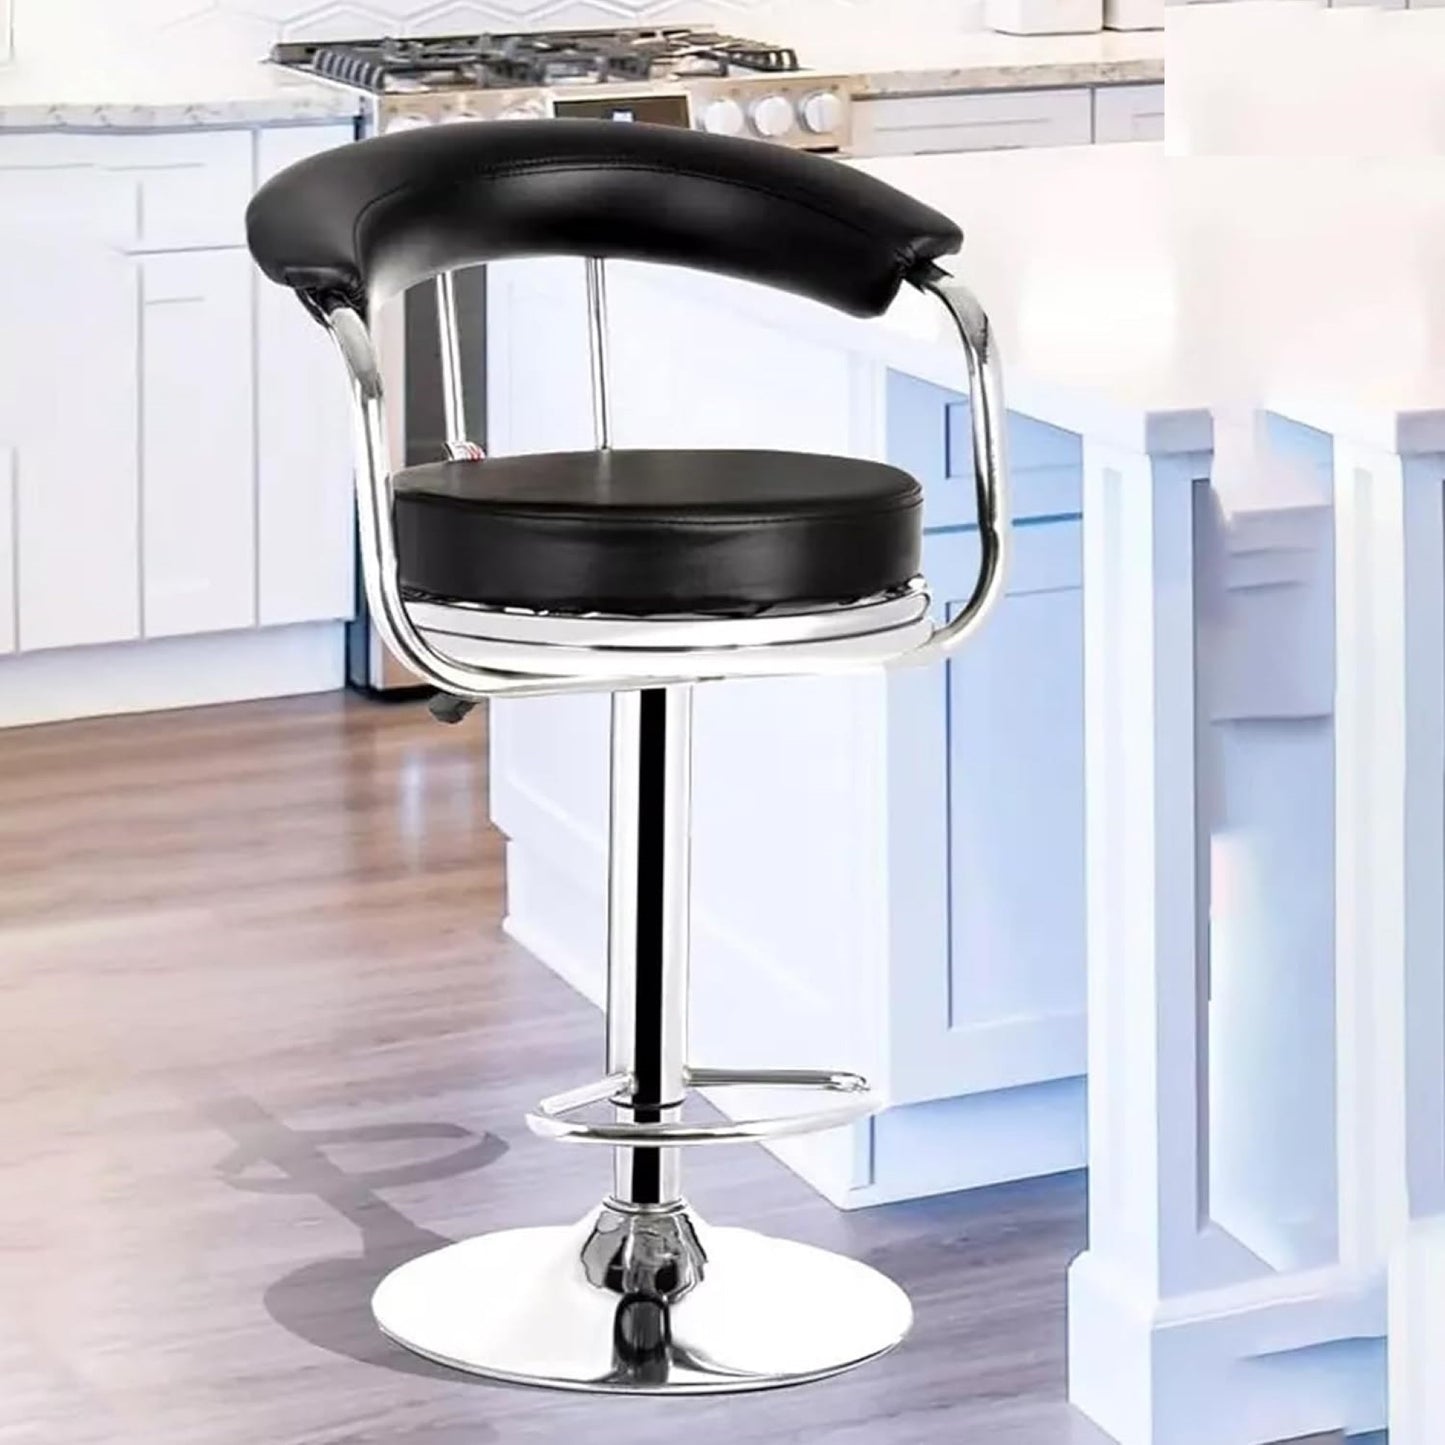 Bowzar Height Adjustable and Revolving Bar Stool/Kitchen Chair